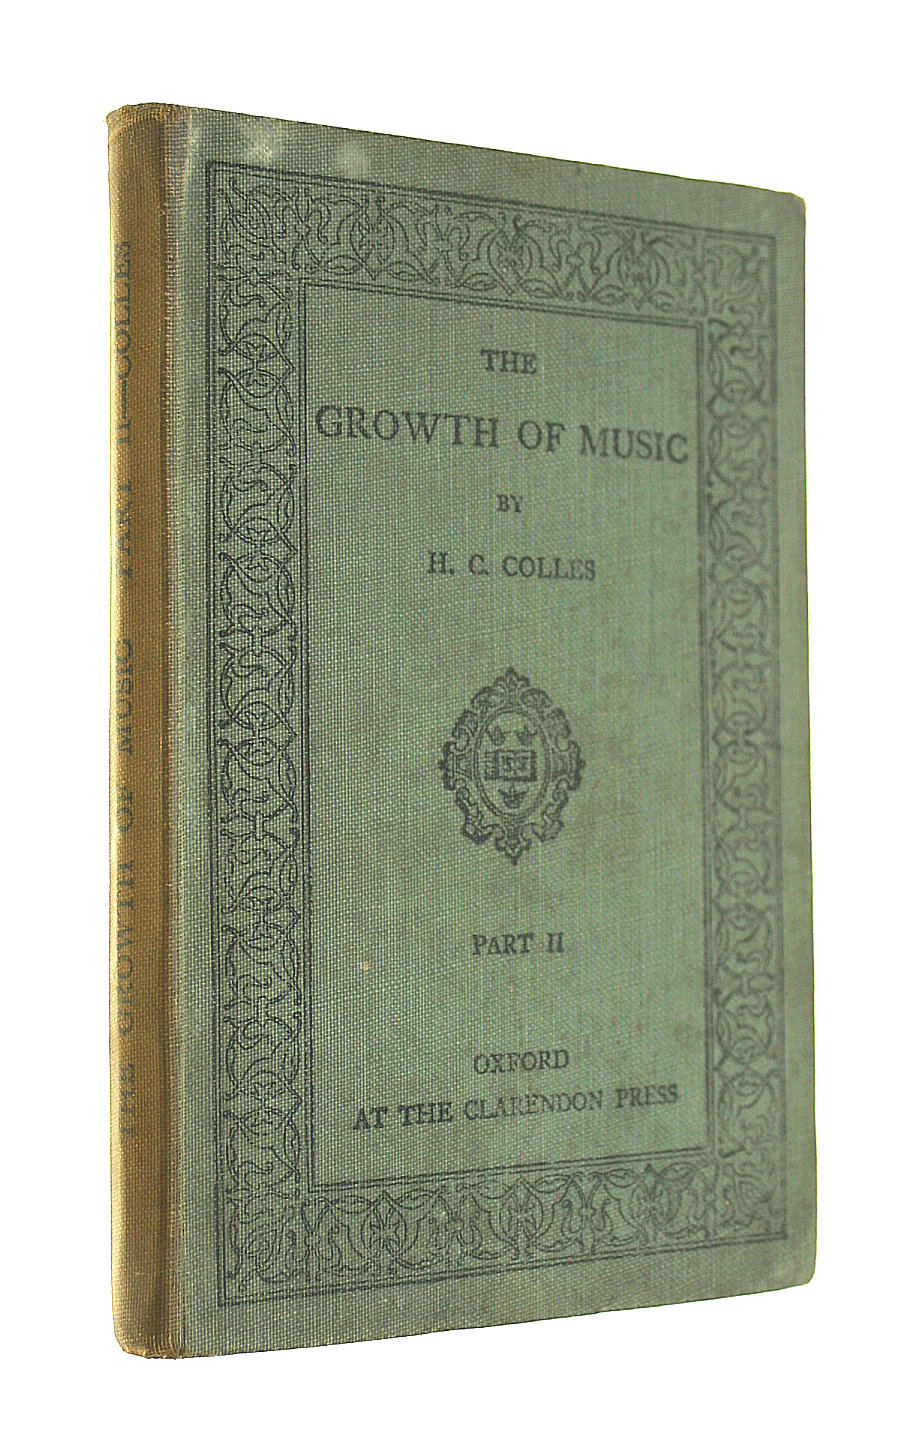 COLLES, H.C. - The Growth Of Music: A Study In Musical History For Schools. Part Ii: The Age Of The Sonata, From C.P.E. Bach To Beethoven